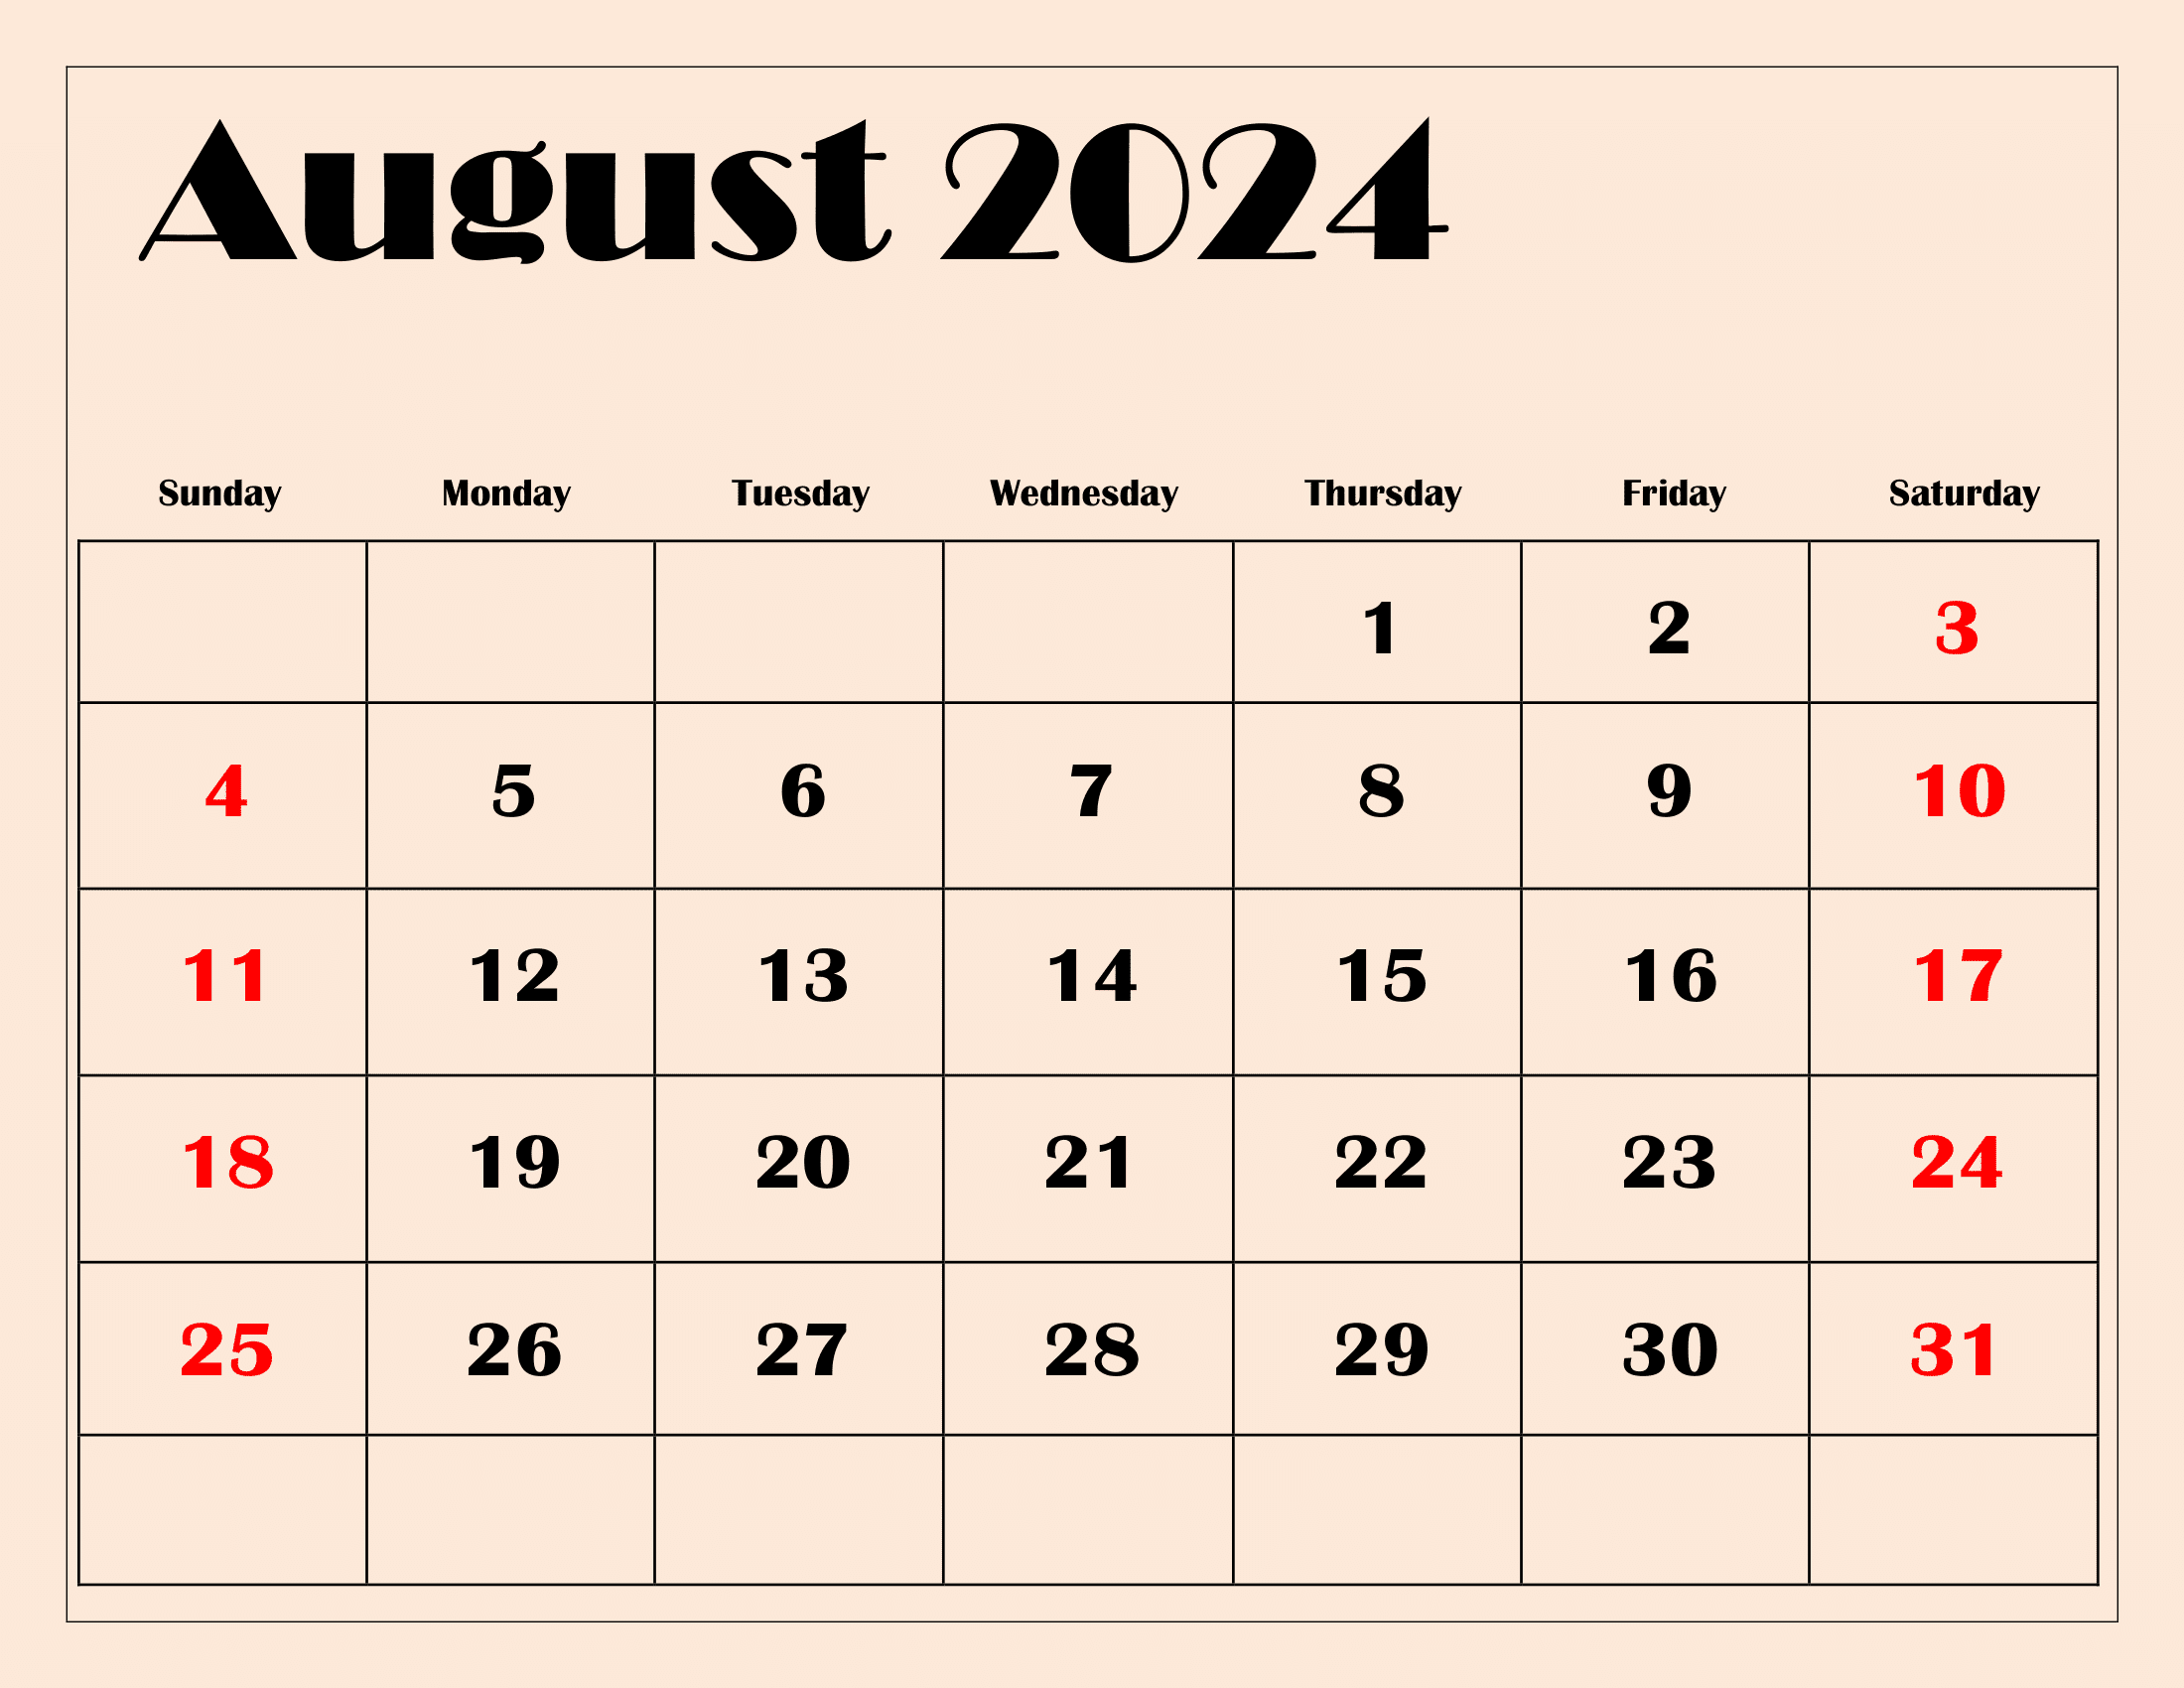 August 2024 Calendar Printable Pdf Templates Free Download intended for Free Printable Black And White Calendar Aug 2024